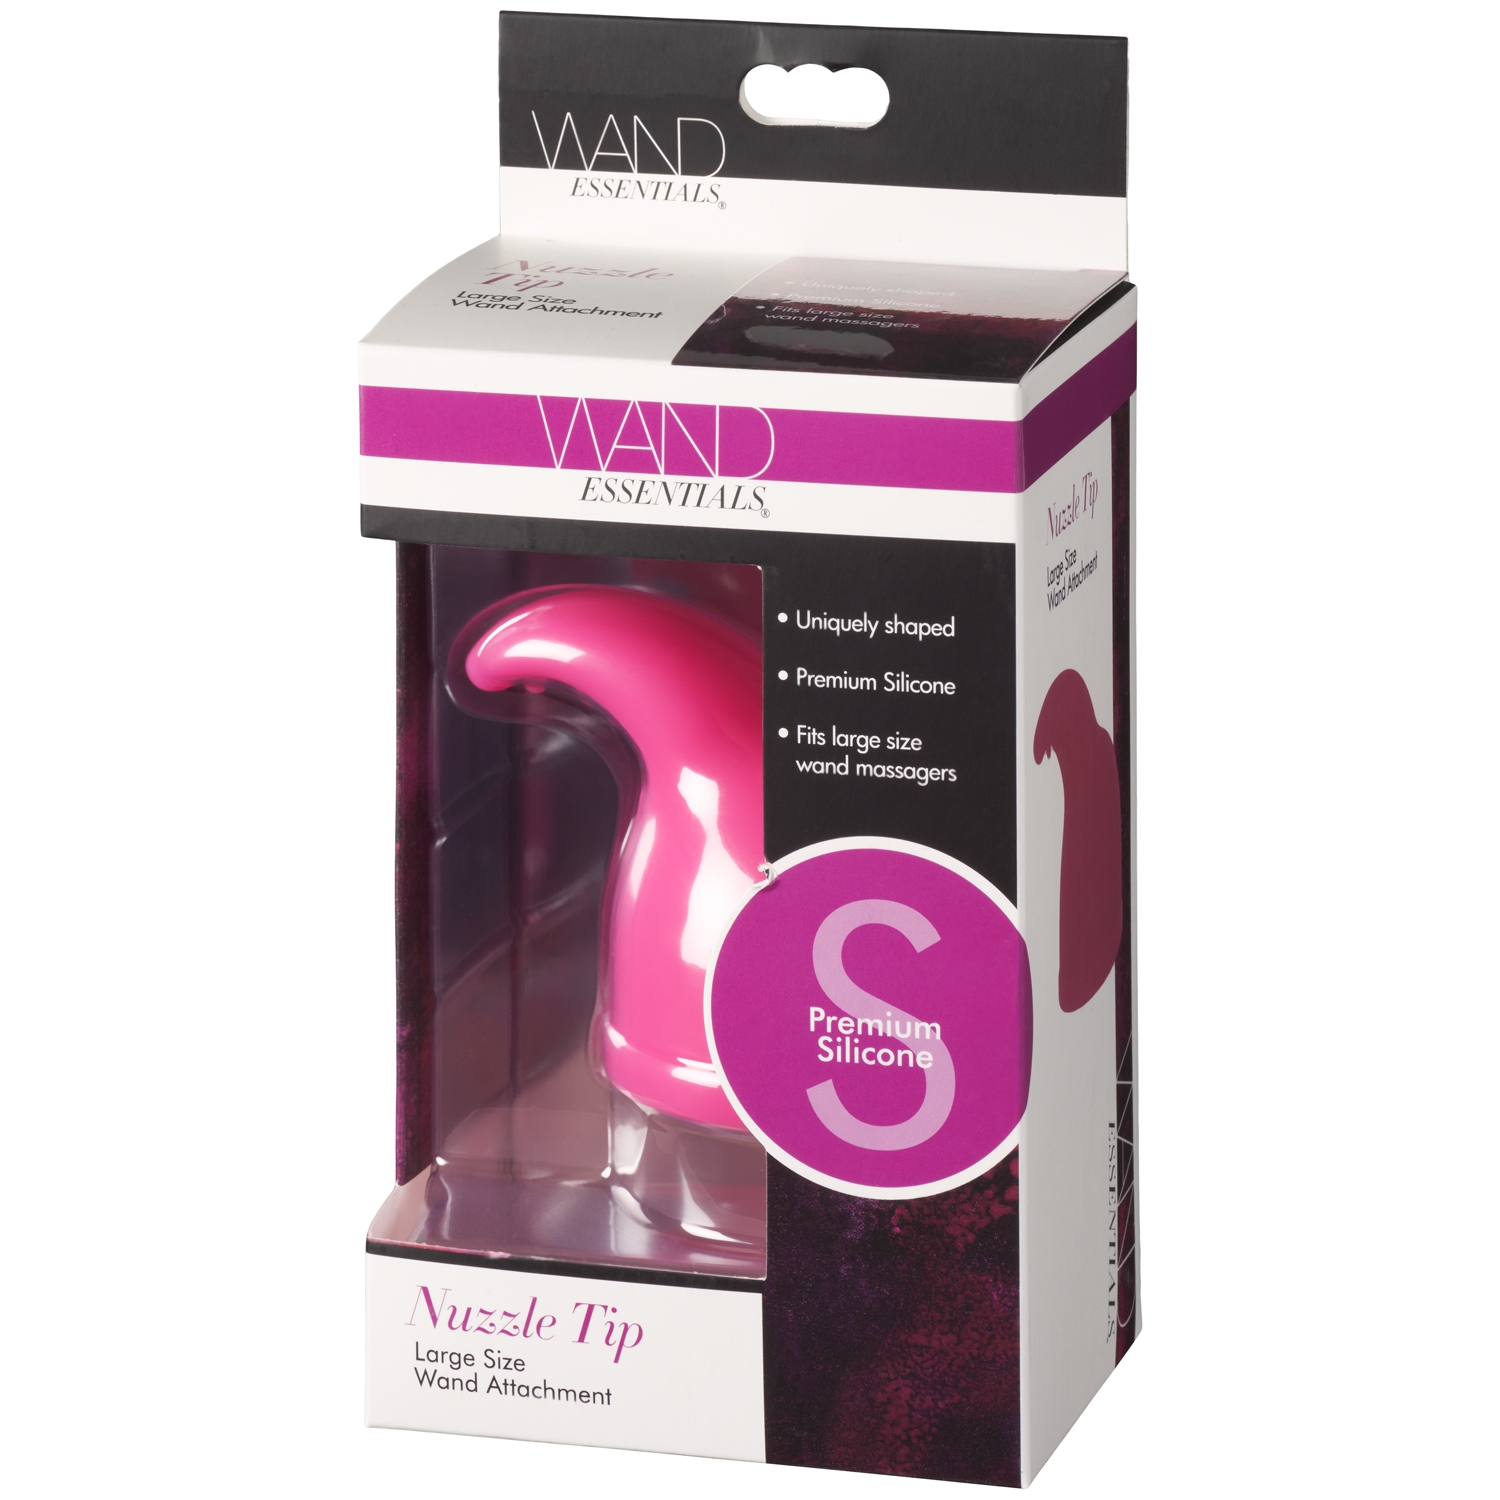 Wand Essentials 3Teez Attachment Boxed- Black Vibrator Accessory Sex Toy